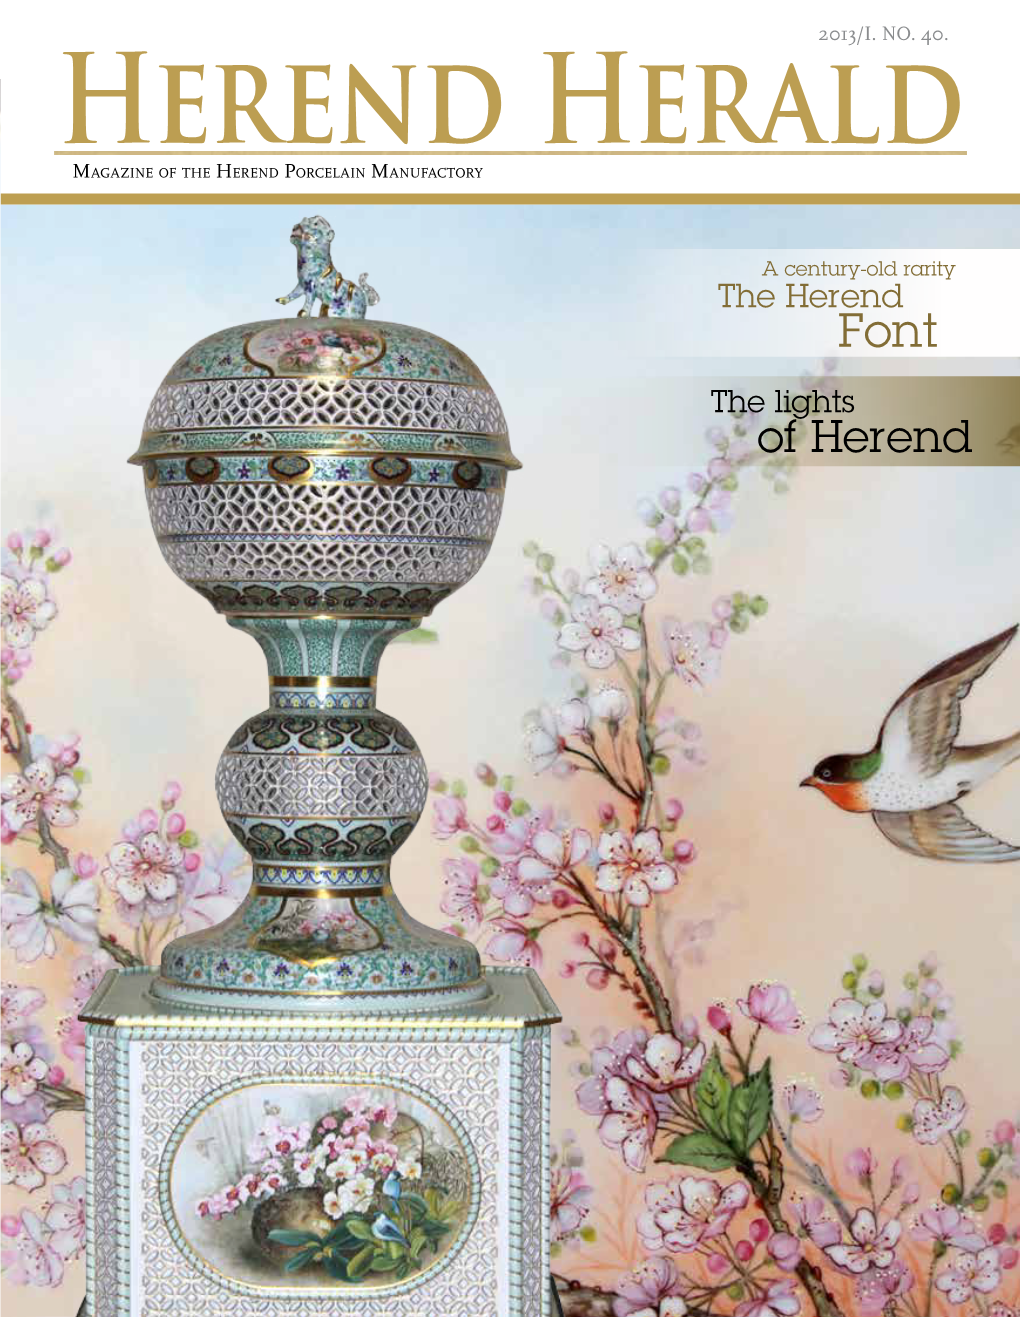 Herend Herald Magazine of the Herend Porcelain Manufactory